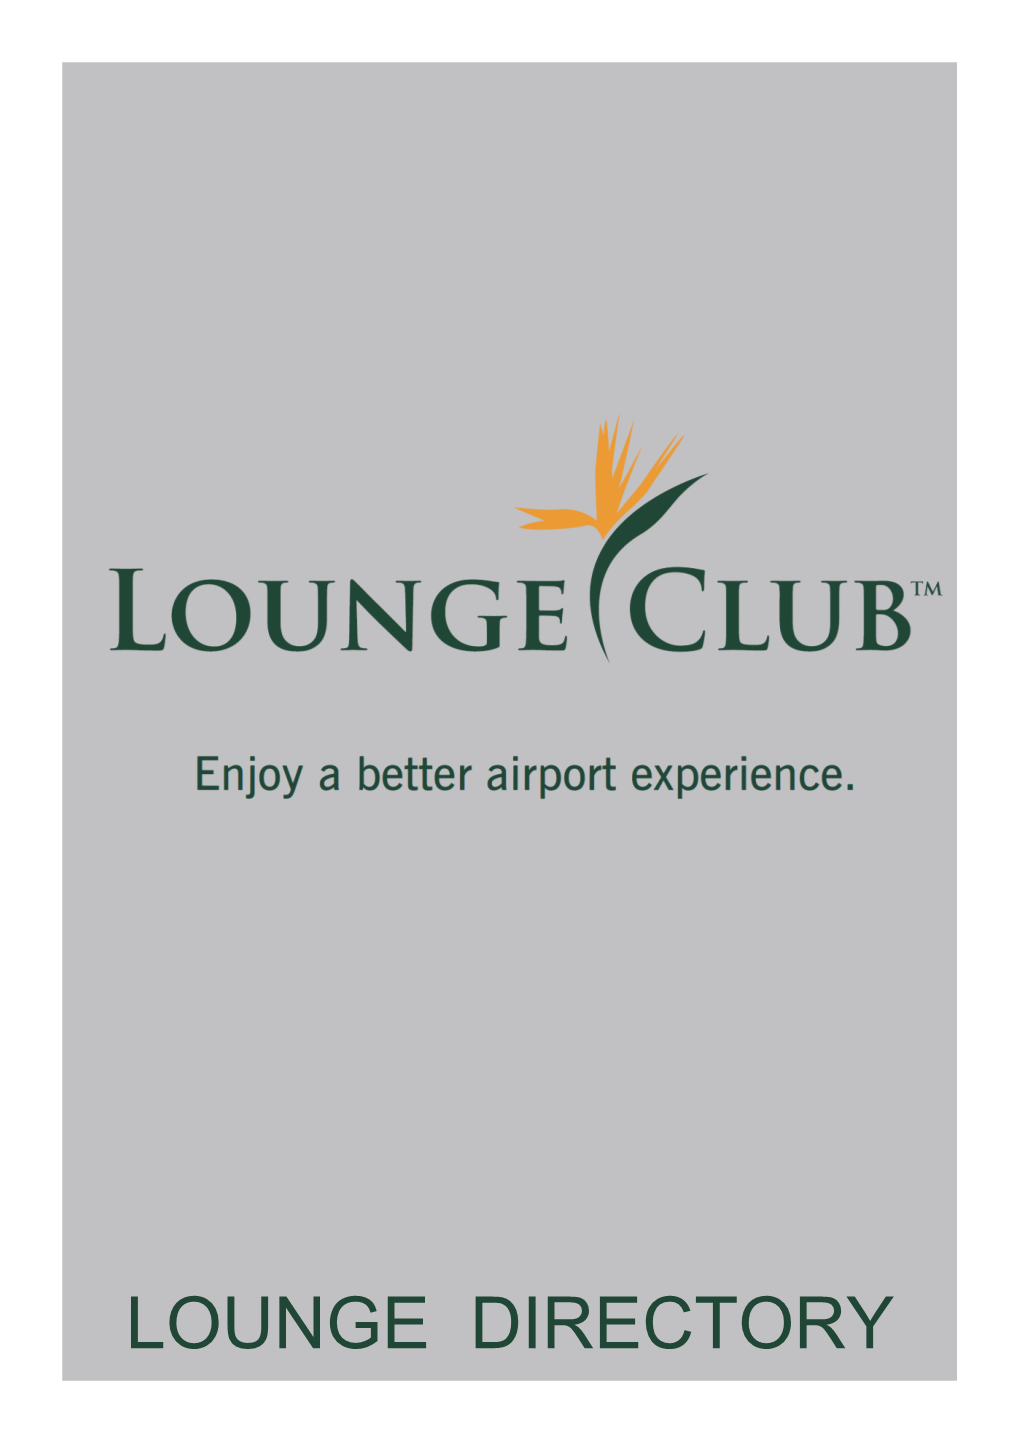 LOUNGE DIRECTORY Content Correct As of 30 September 2021